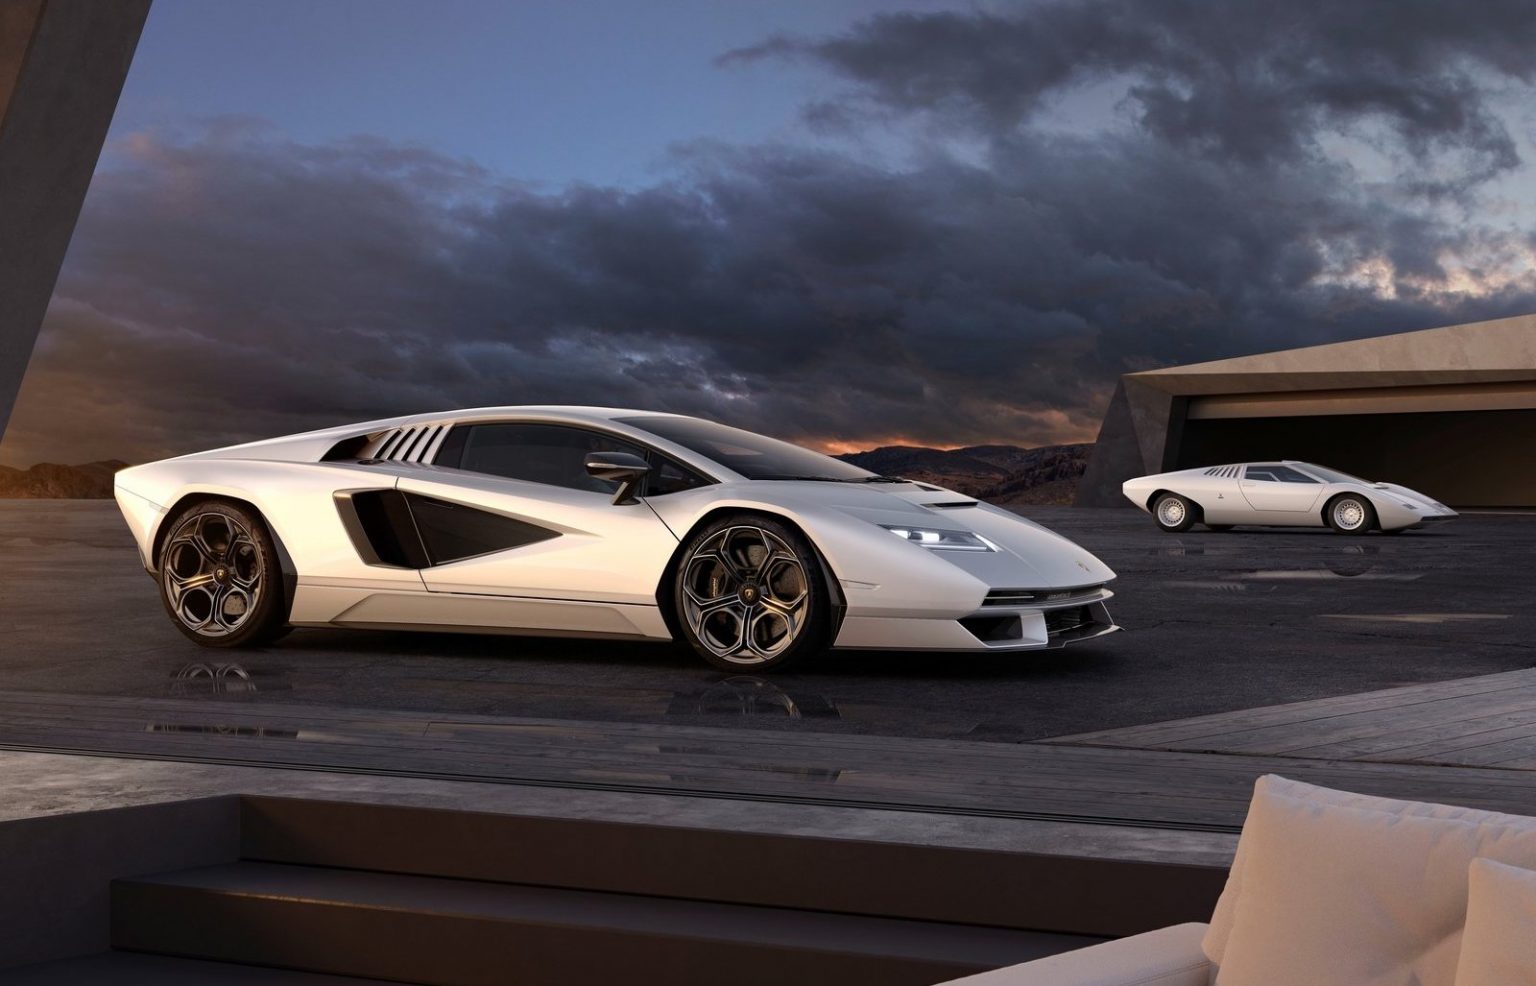 unveils new Countach LPI 8004, marks 50th anniversary